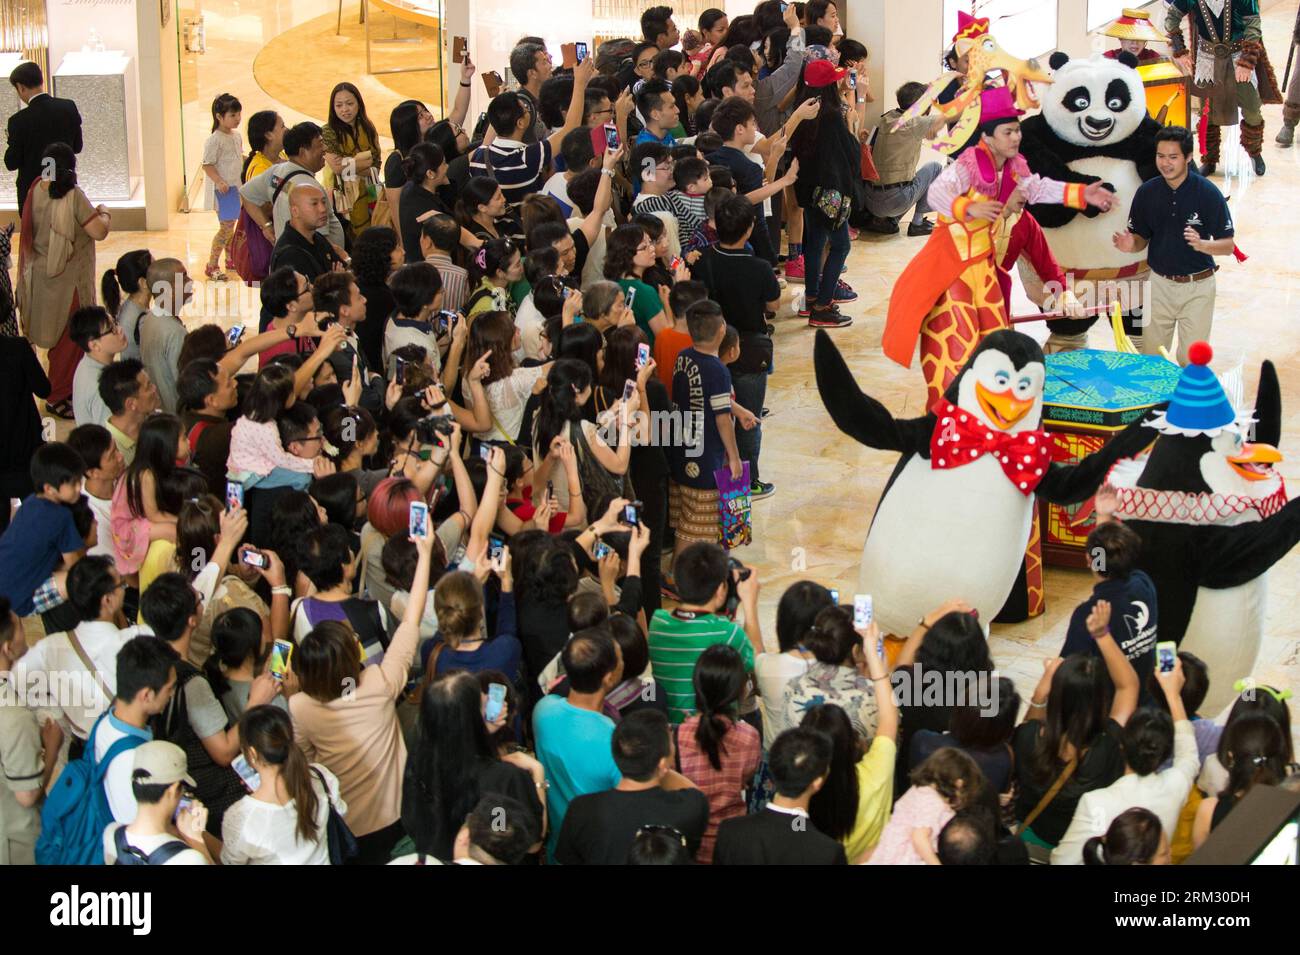 Bildnummer: 59922671  Datum: 30.06.2013  Copyright: imago/Xinhua (130630) -- MACAO, June 30, 2013 (Xinhua) -- take pictures of staff members dressed as cartoon movie characters during an activity in south China s Macao, June 30, 2013. The launch ceremony of a Dreamworks experiencing resort in Cotai Strip was held here Sunday. From July 1, 2013, can enjoy themselves with characters from movies produced by Dreamworks, a world s leading film studio, at Cotai Strip. (Xinhua/Cheong Kam Ka)(wjq) CHINA-MACAO-DREAMWORKS-ACTIVITY (CN) PUBLICATIONxNOTxINxCHN Entertainment Comicfiguren x2x xst 2013 quer Stock Photo